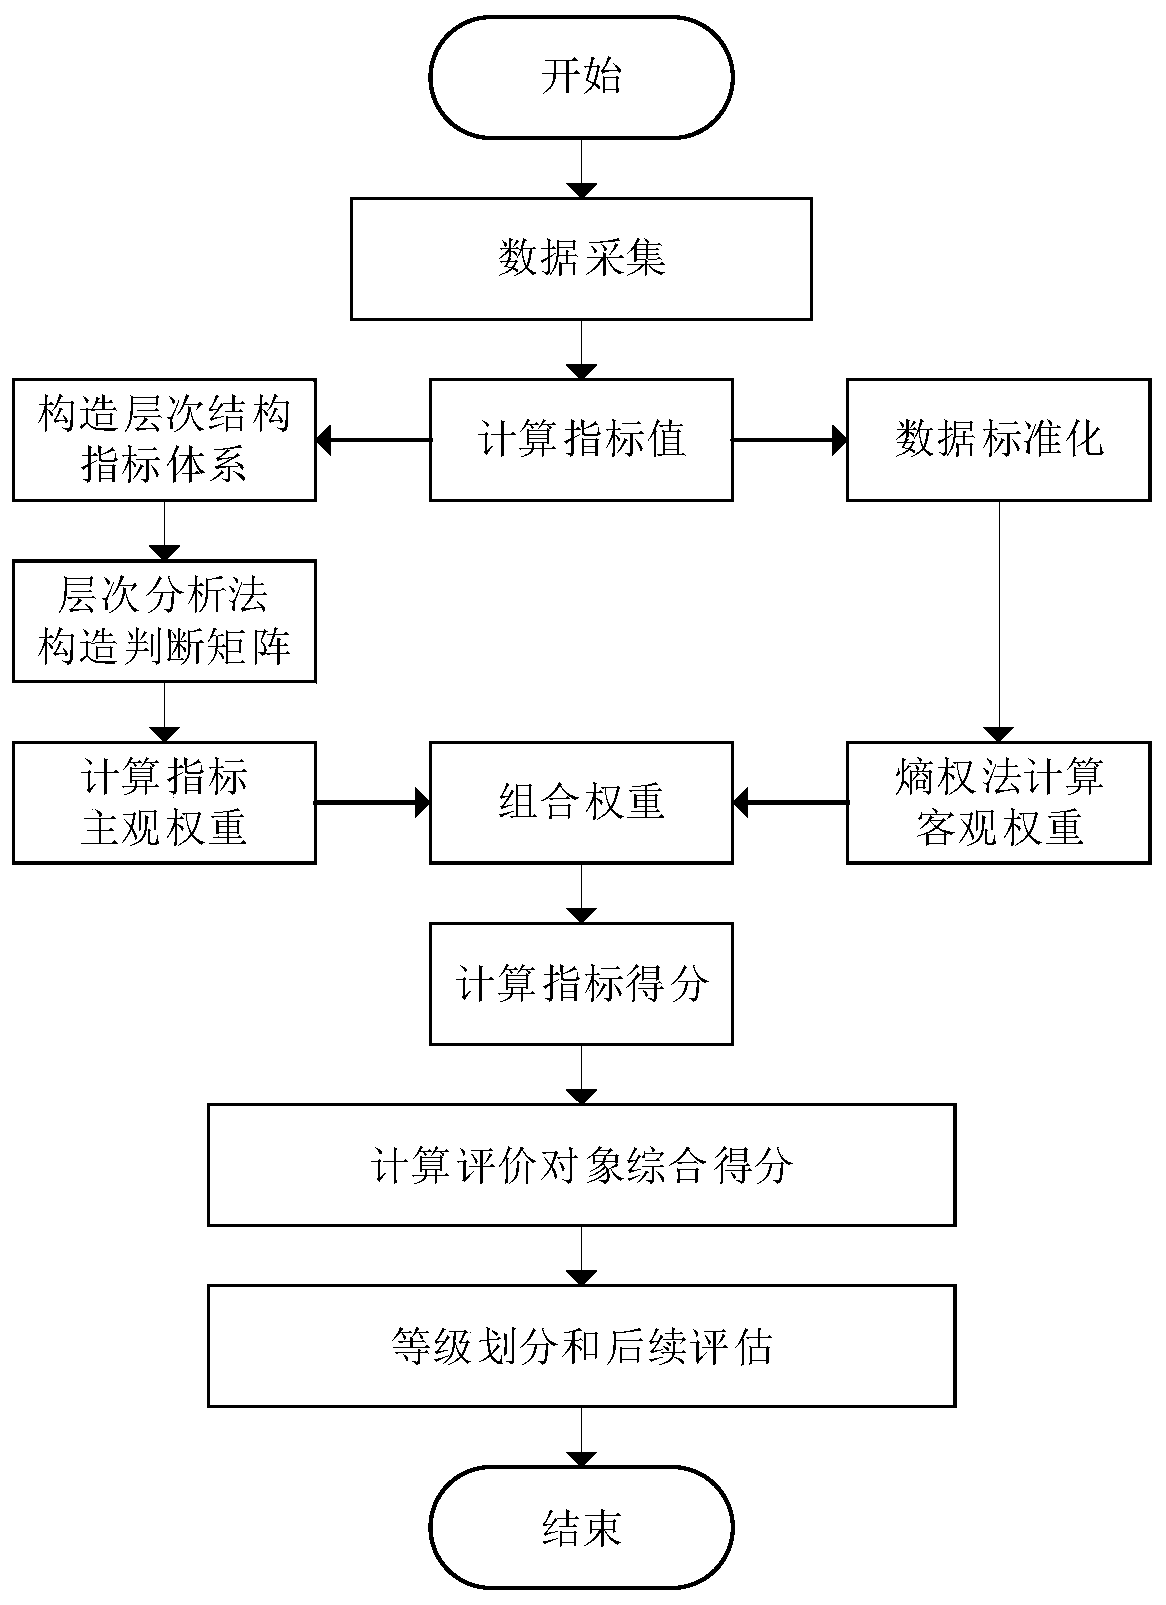 Distribution network analysis and investment decision method based on association rule mining